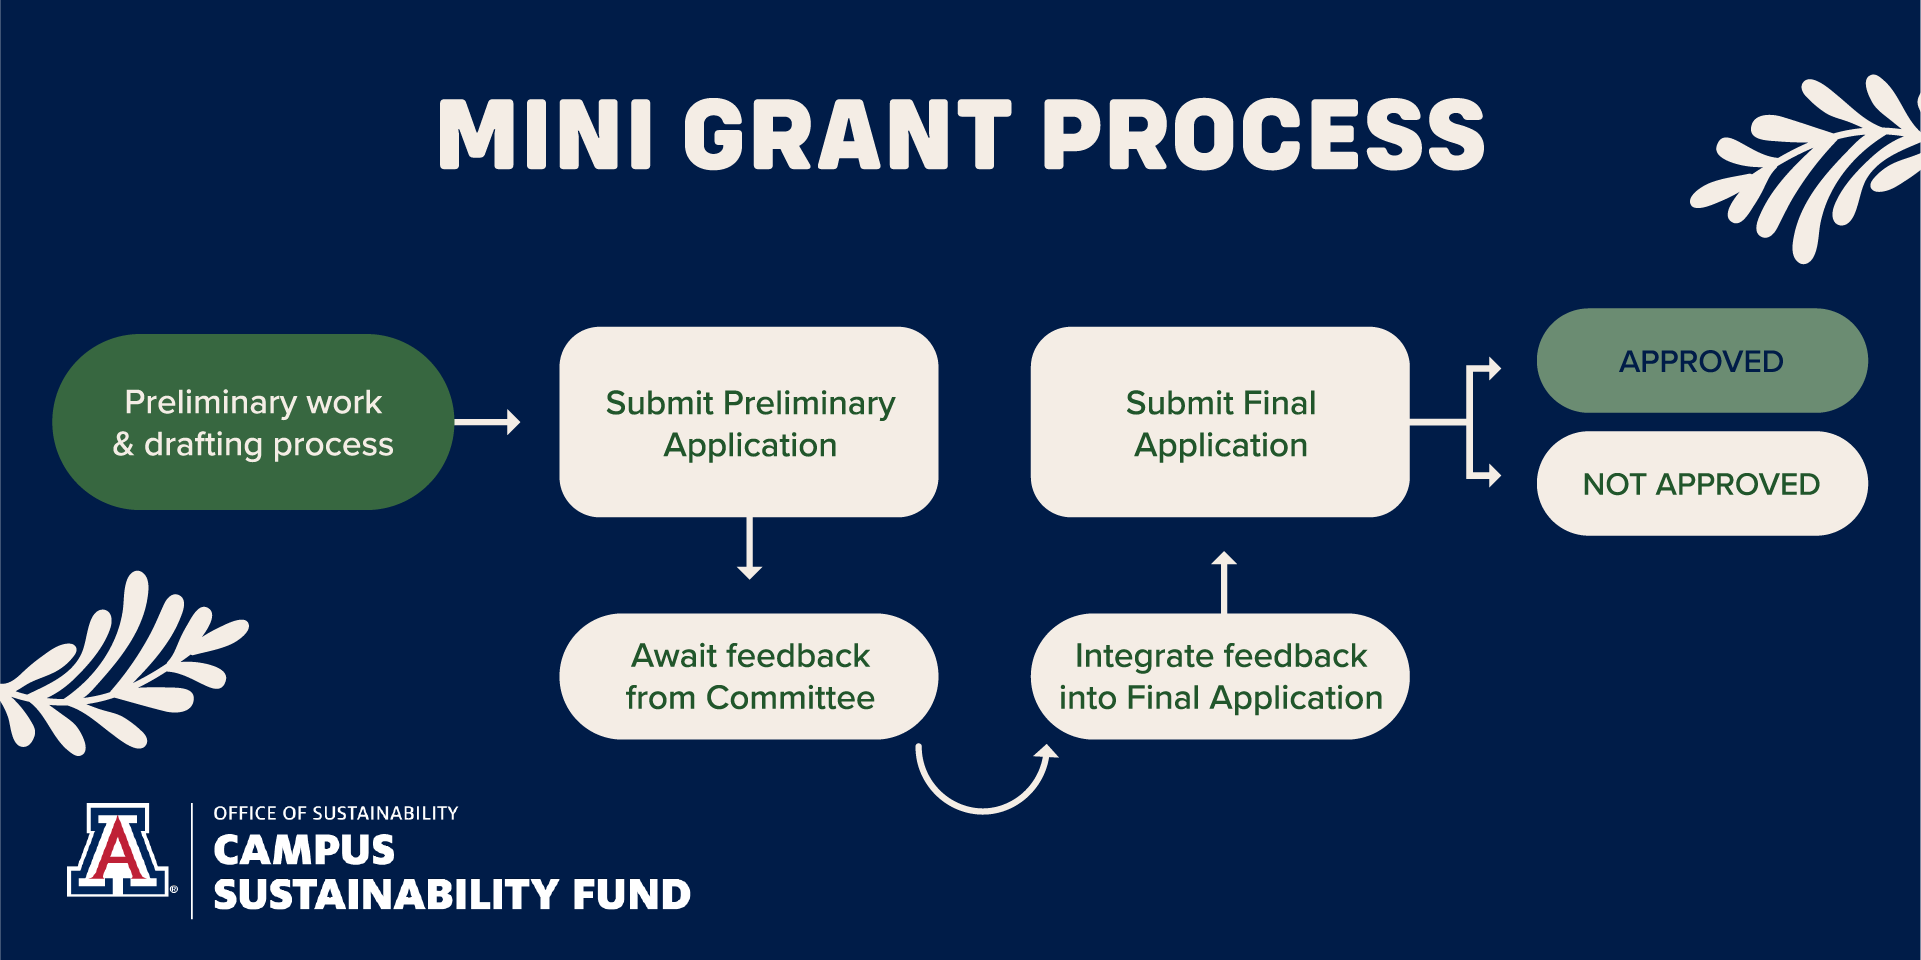 The steps to completing a Mini Grant are as follows: 1.Complete preliminary work and drafting, 2. Submit Preliminary Application, 3. Await feedback from the Committee, 4. Integrate feedback in Final Application, 5. Submit Final Application, and 6. Applicant will be notified if their application has been approved or not approved